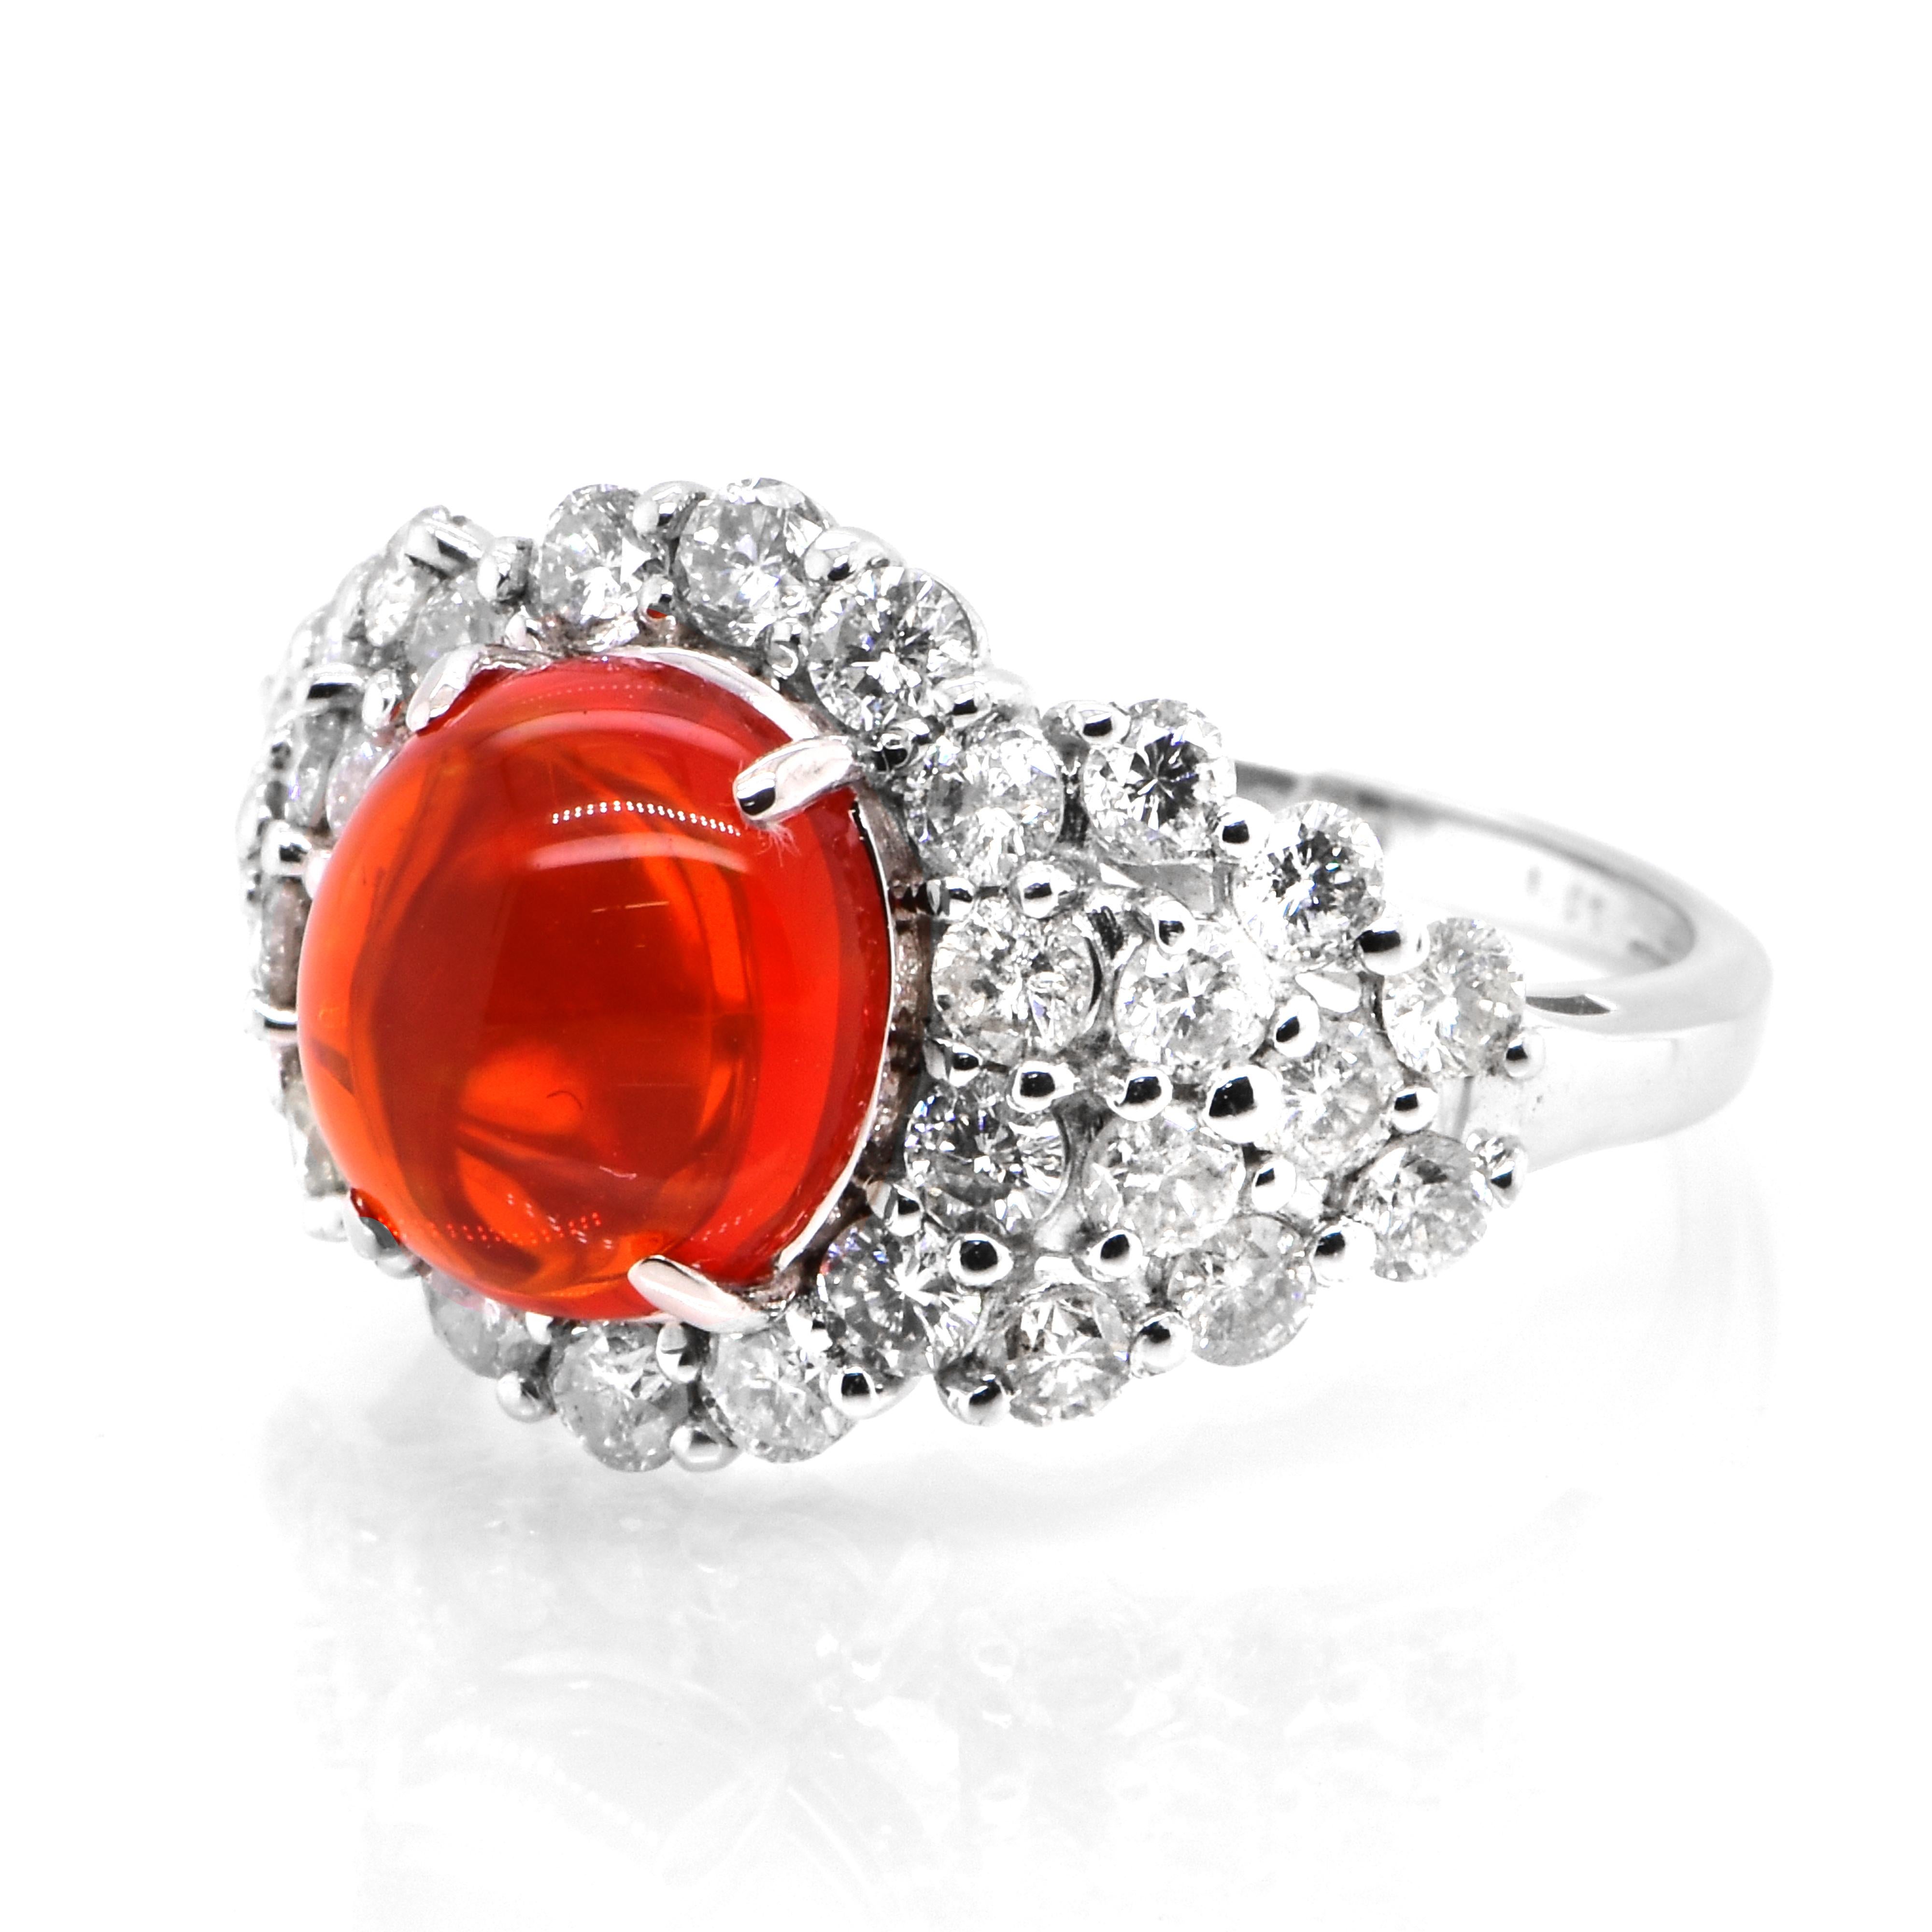 A beautiful ring featuring a 2.36 Carat Natural Mexican Fire Opal and 1.67 Carats of Diamond Accents set in Platinum. Opals are known for exhibiting flashes of rainbow colors known as 